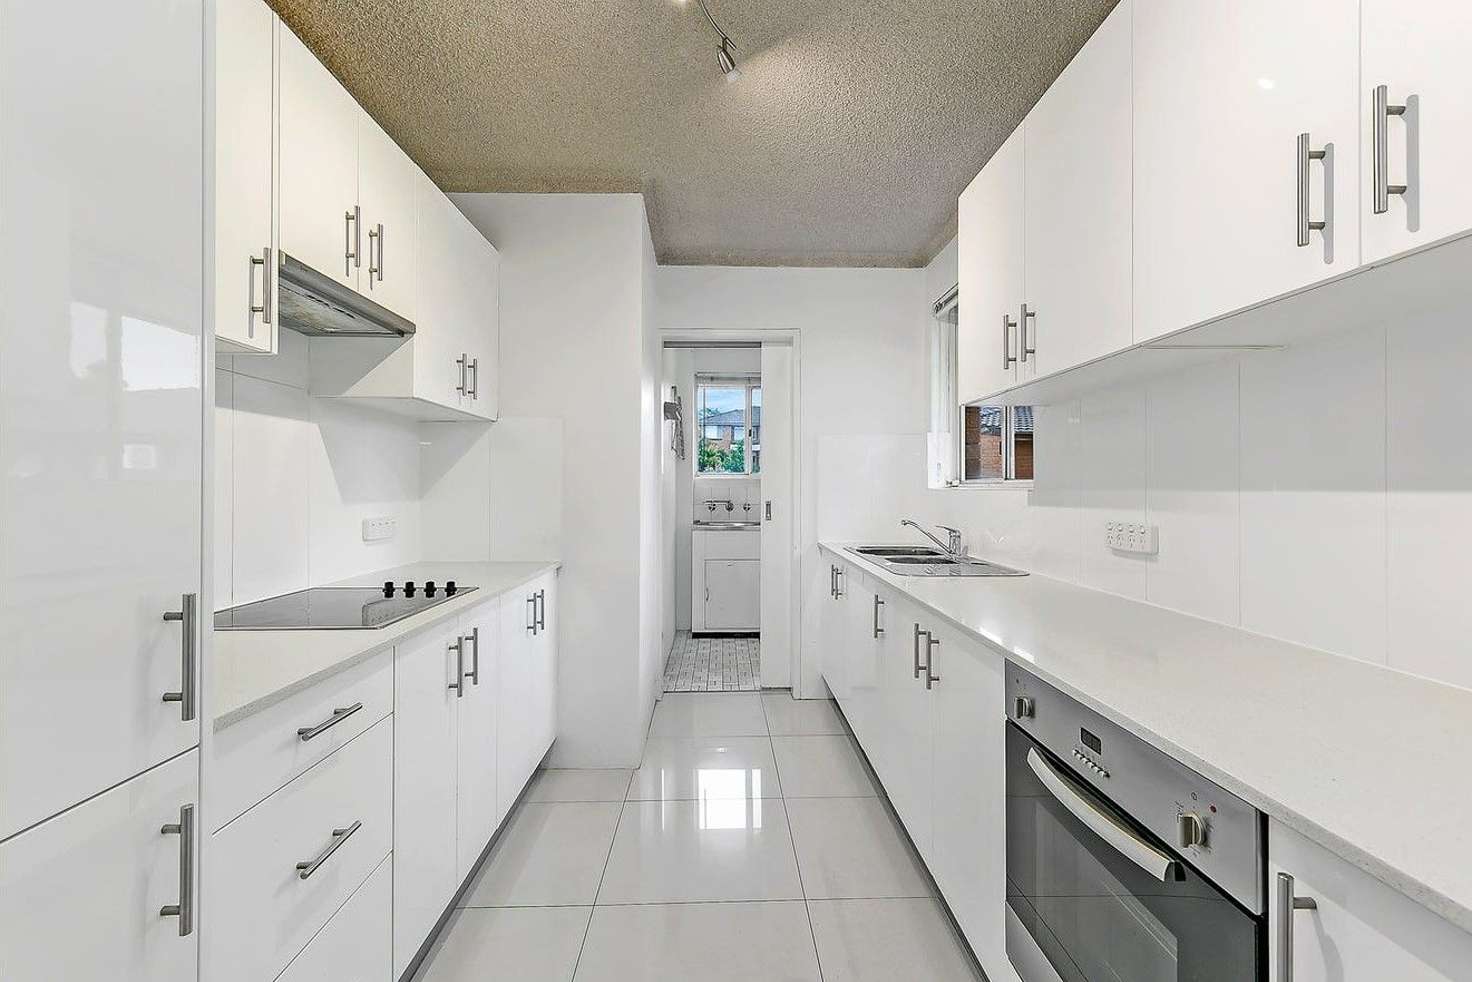 Main view of Homely apartment listing, 23/26-28 Orchard Street, West Ryde NSW 2114